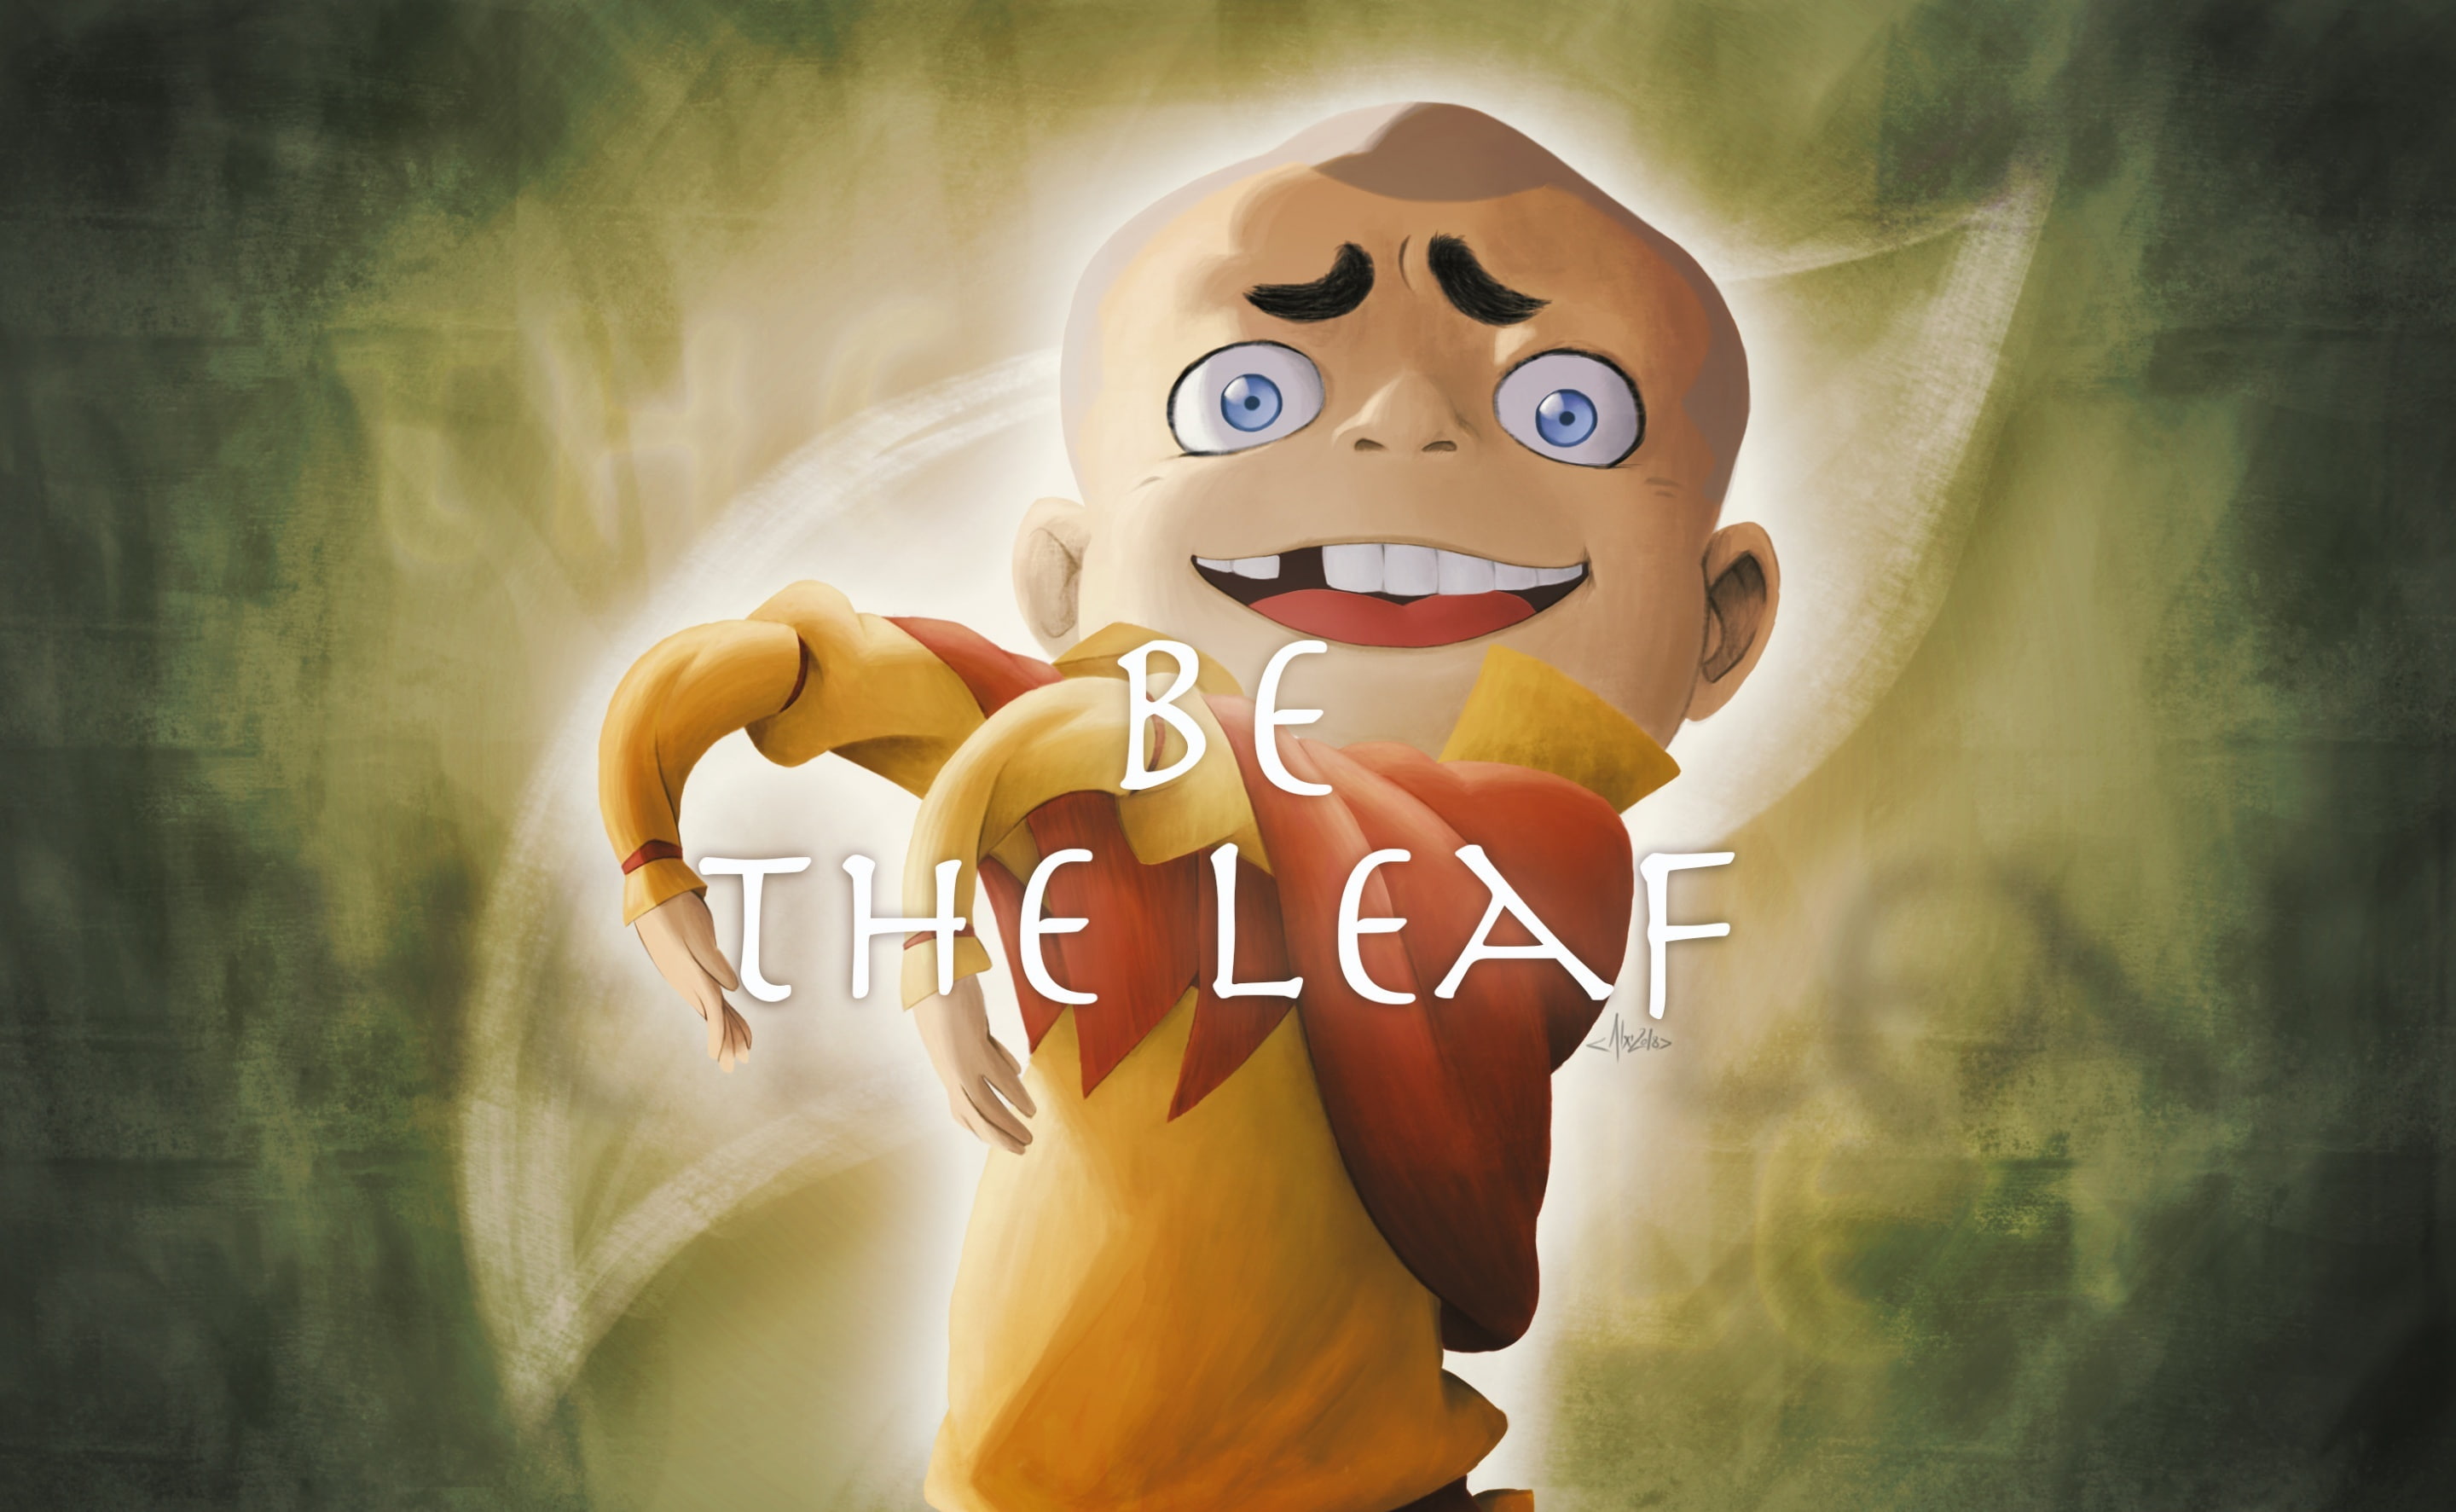 HD Wallpaper Meelo Be The Leaf